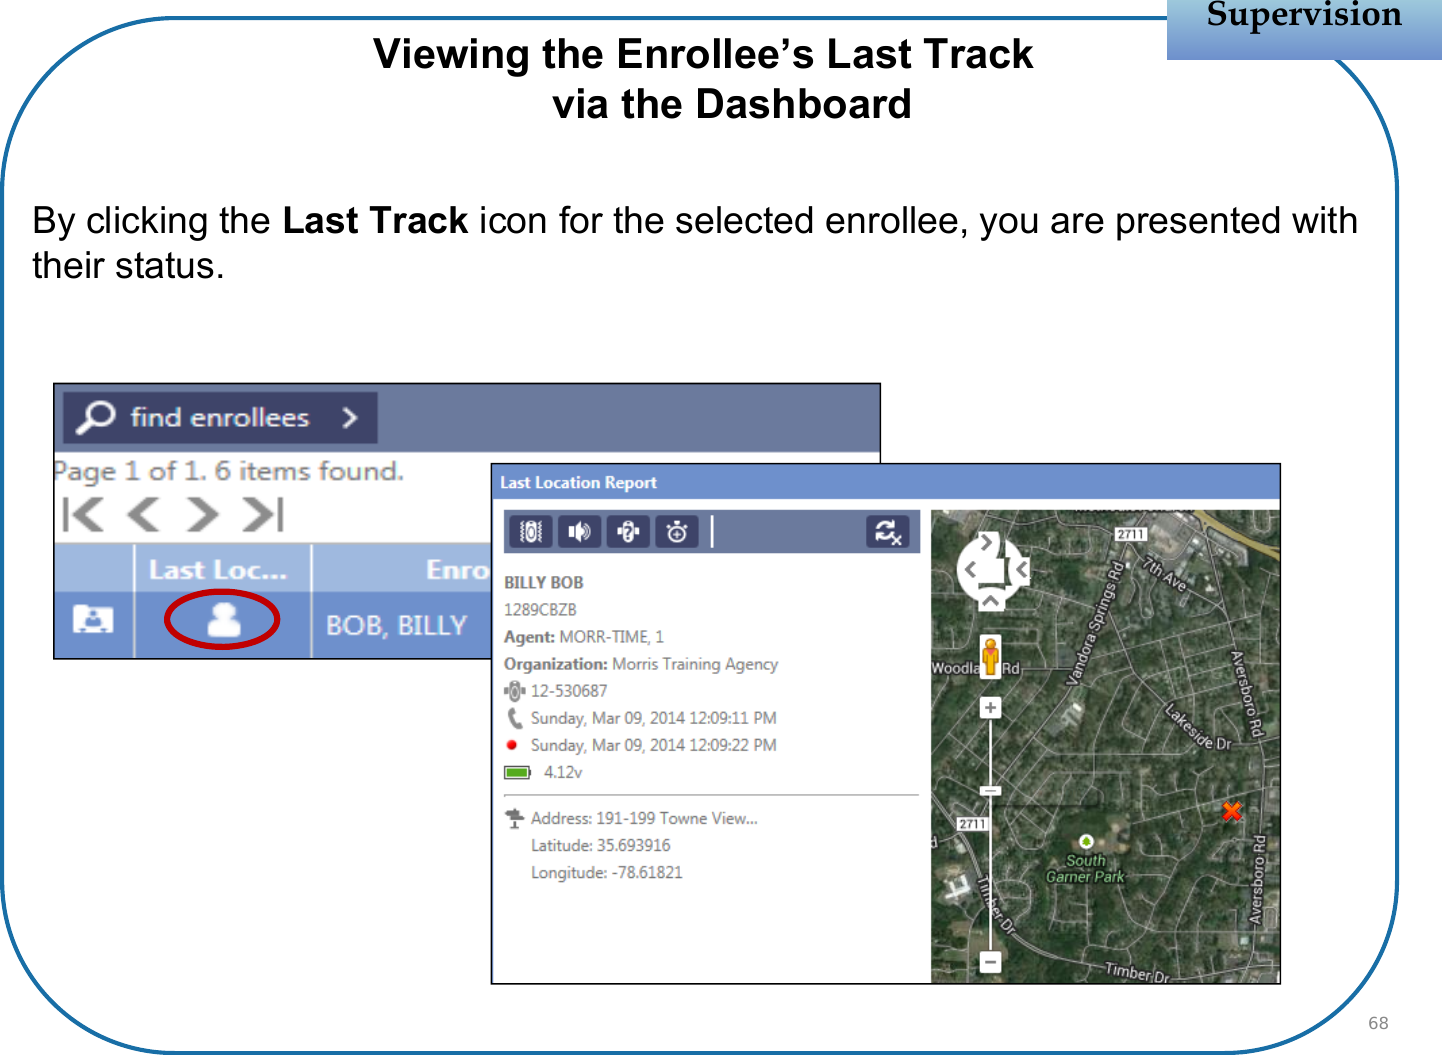 Viewing the Enrollee’s Last Trackvia the DashboardBy clicking the Last Track icon for the selected enrollee, you are presented with their status.SupervisionSupervision68